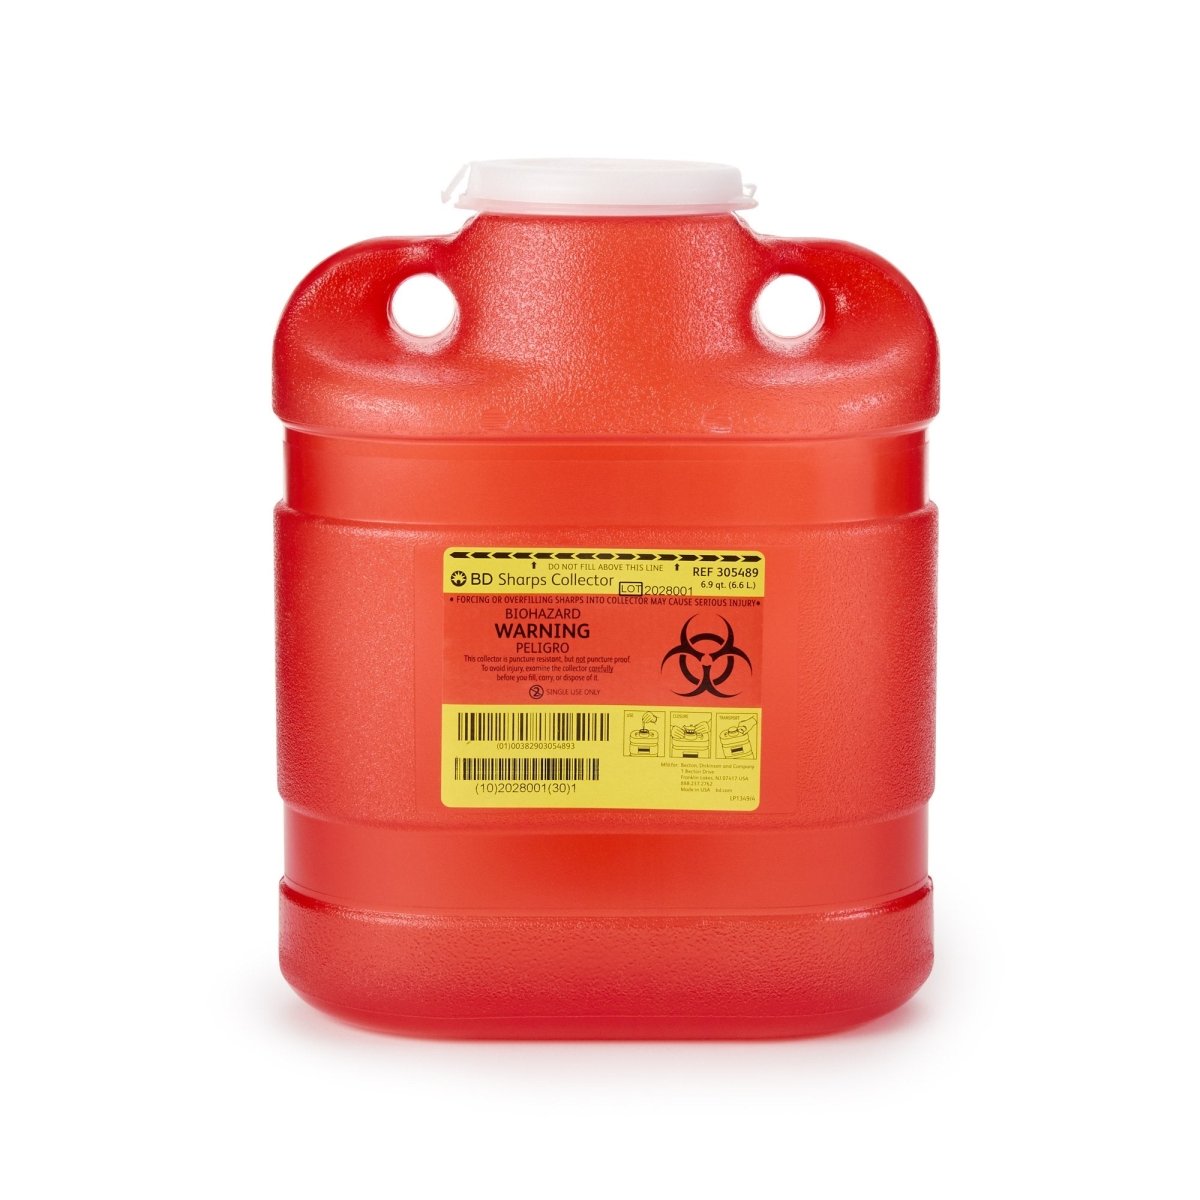 Becton Dickinson Red Sharps Container - 140599_CS - 2